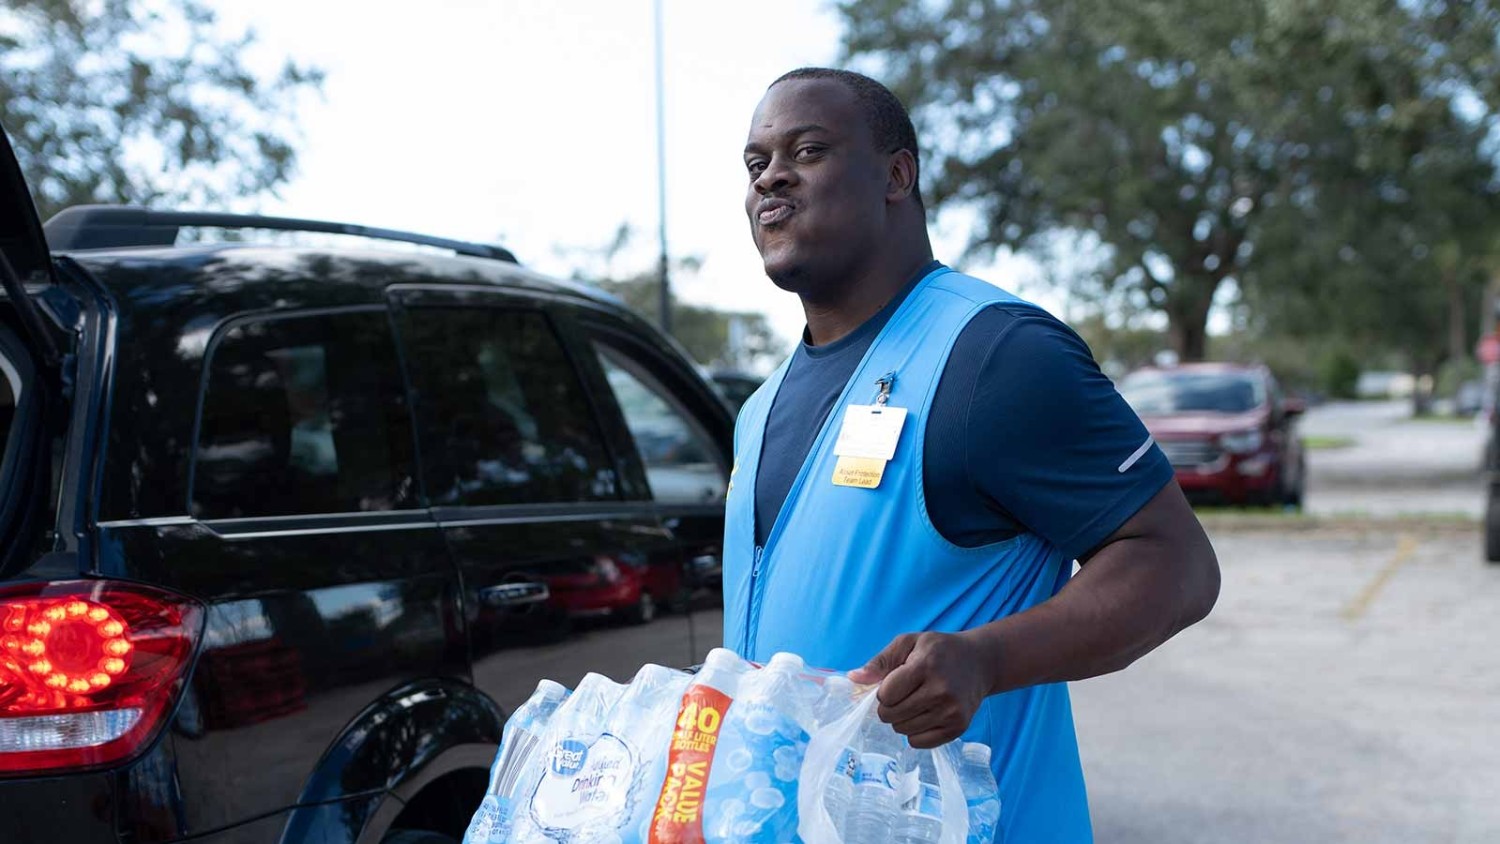 An associate carries a case of bottled water to a customer's trunk.